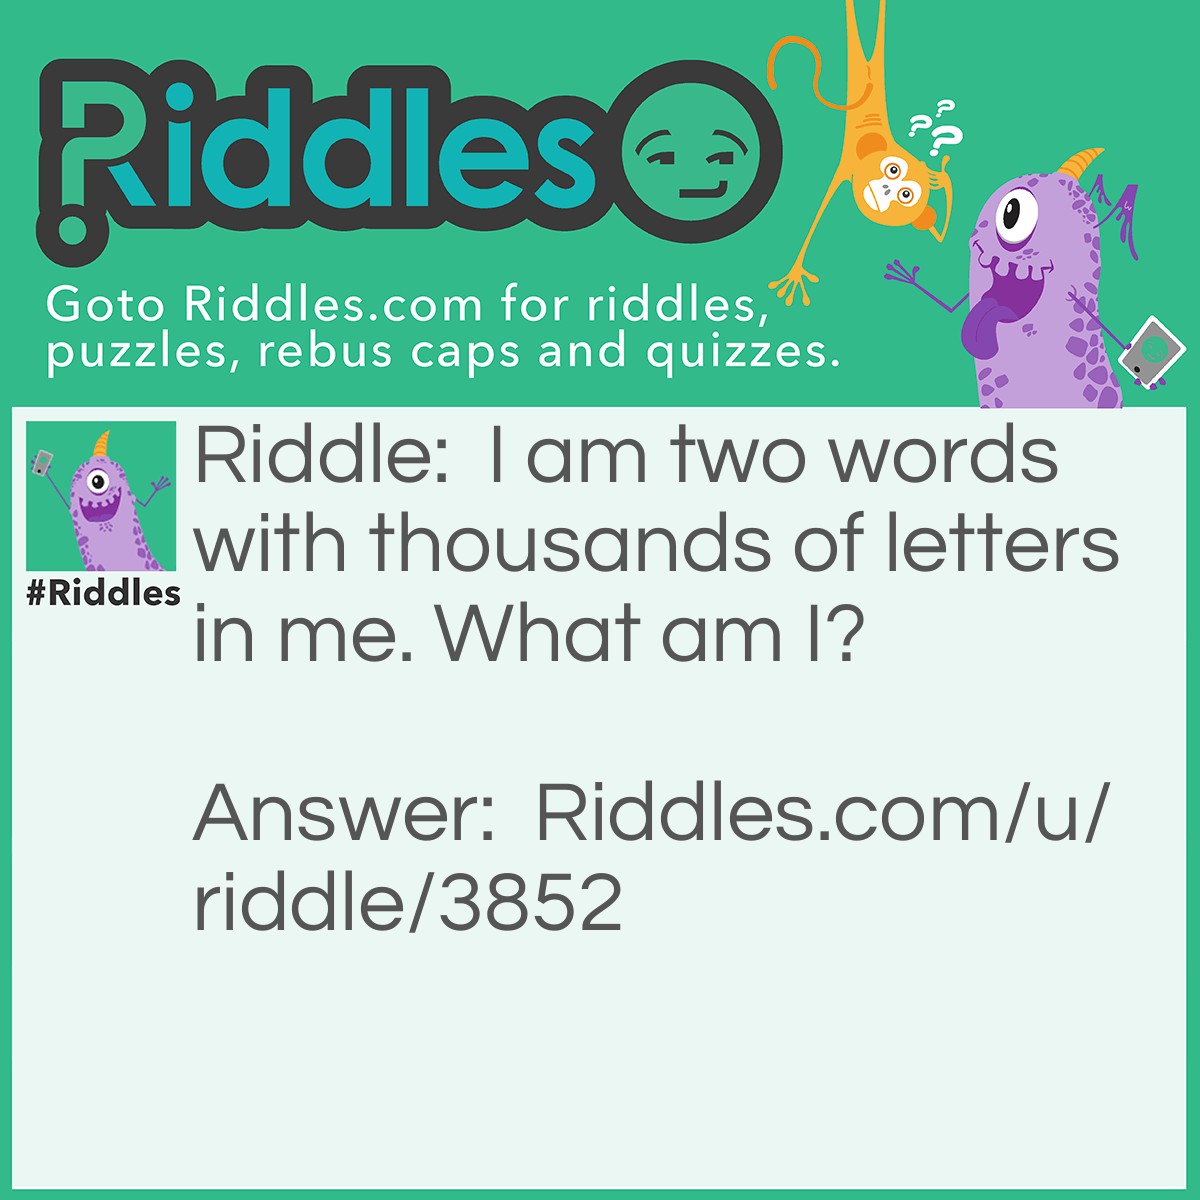 Riddle: I am two words with thousands of letters in me. What am I? Answer: I am a " post office " because thousands of letters are found in the post office.